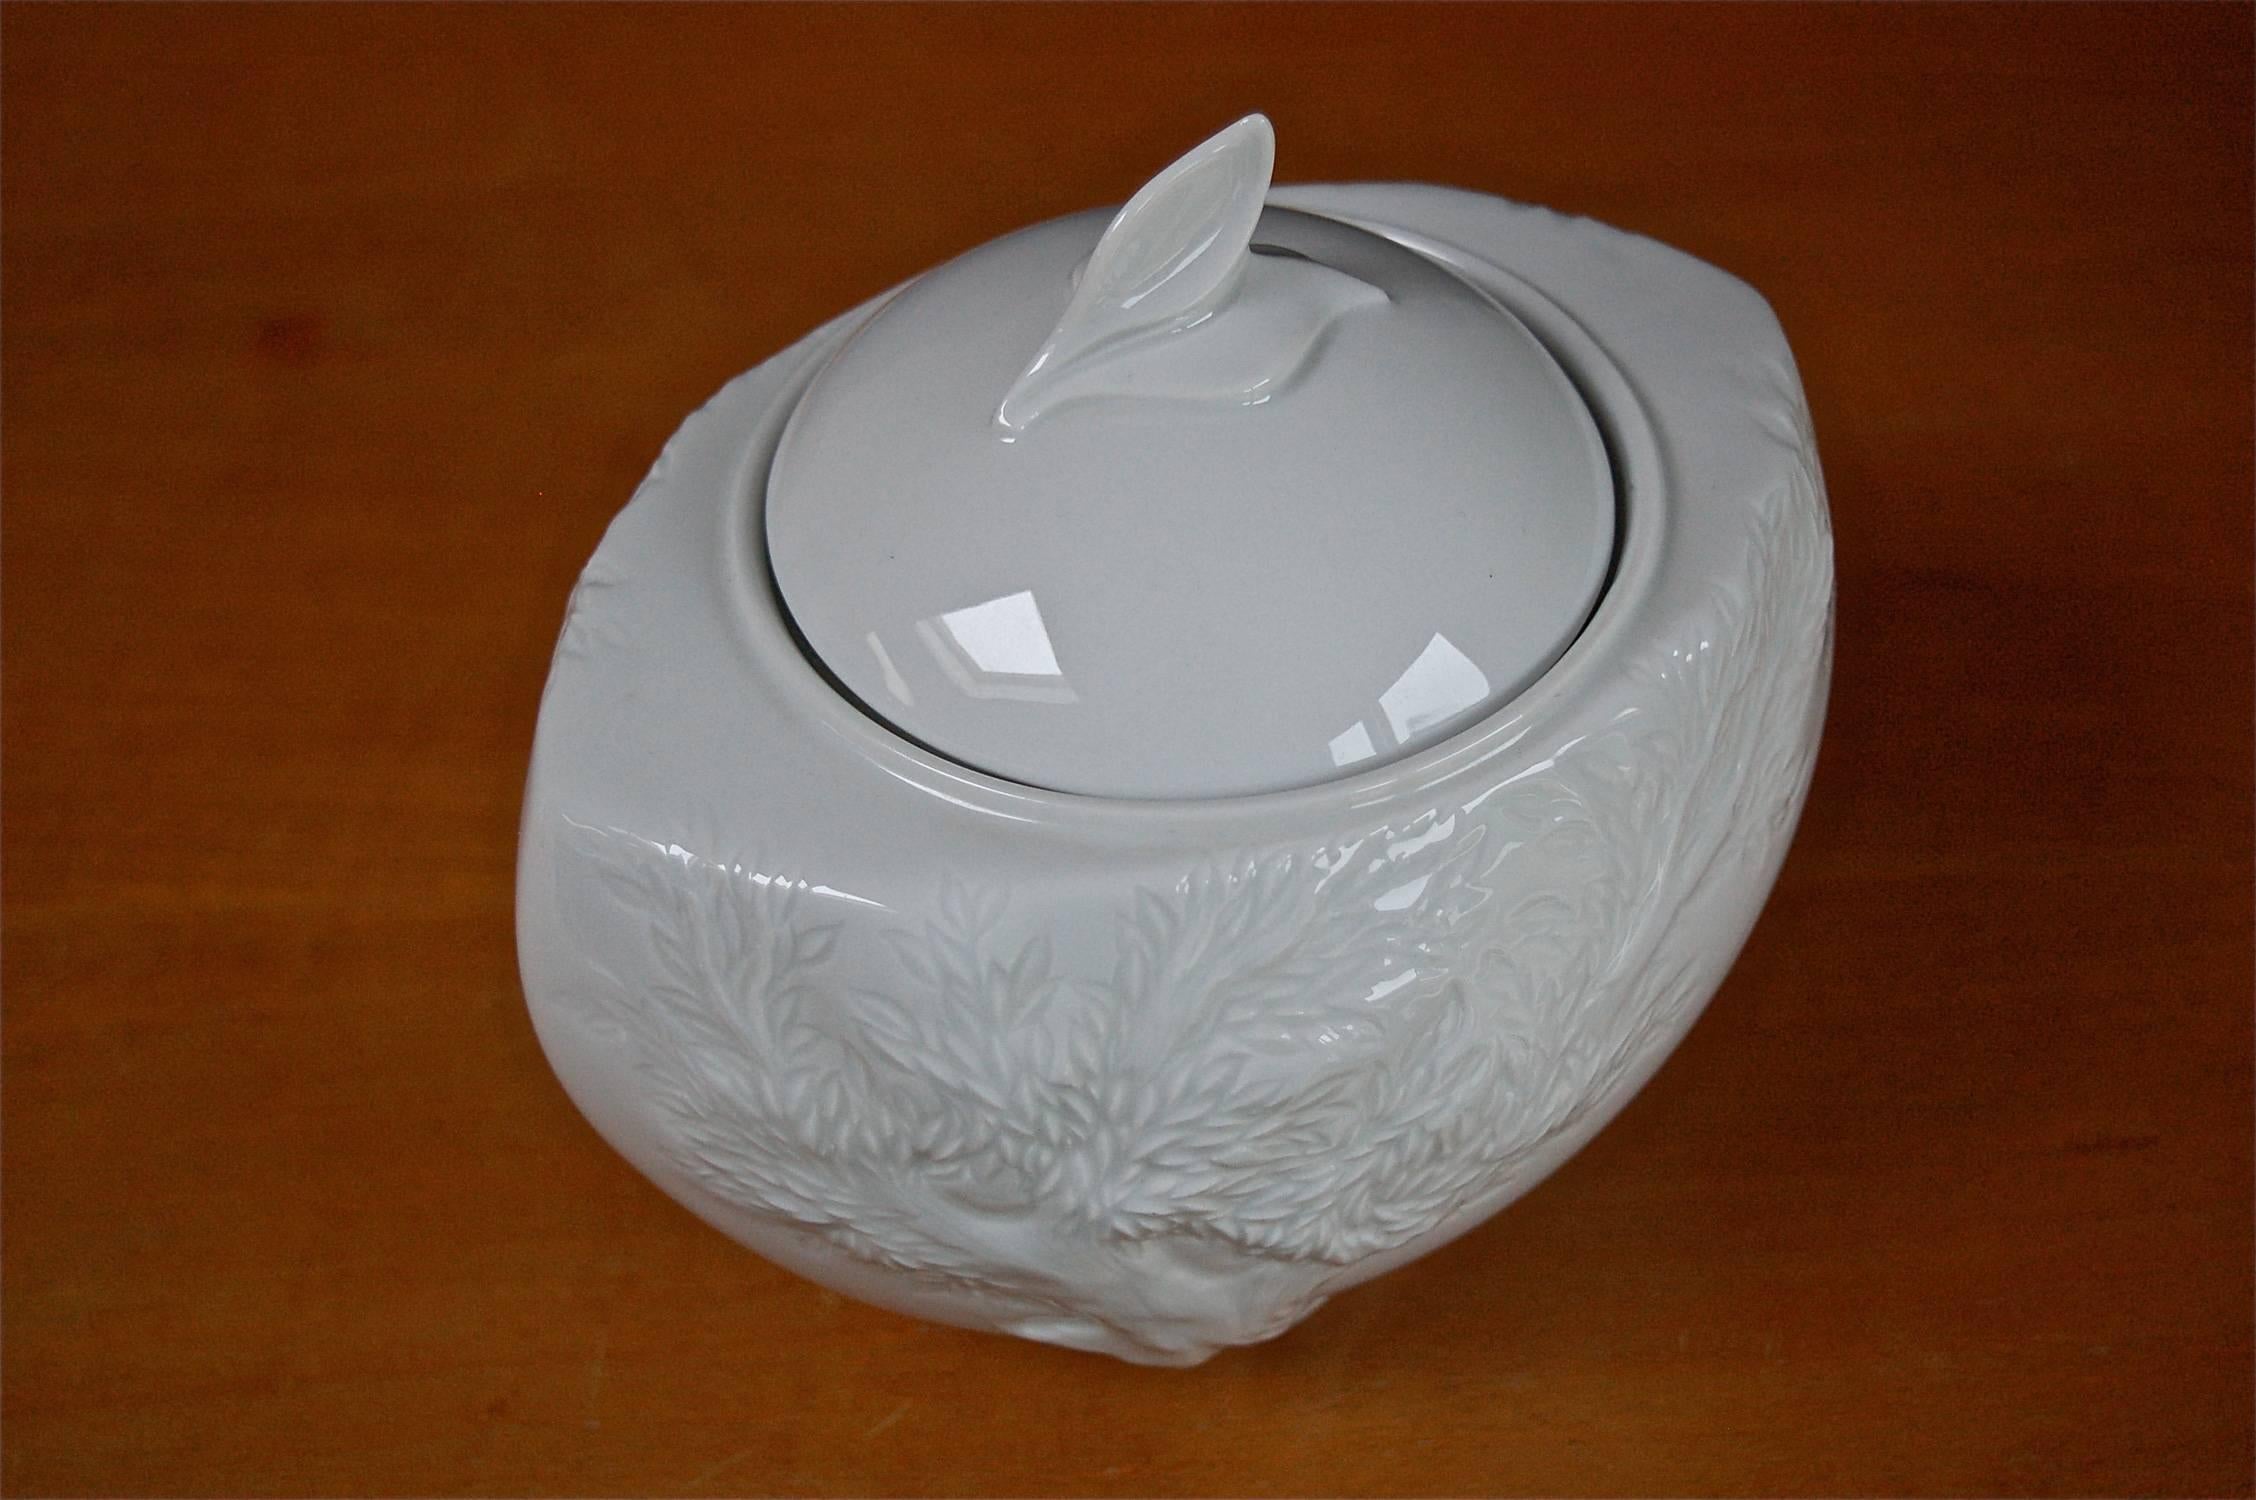 This decorative pot is a rather unusual creation by well established manufacturer of fine Bavarian porcelain Seltmann Weiden, who are more known for their dinner services and decorative chargers. The willow relief decoration gives this piece its